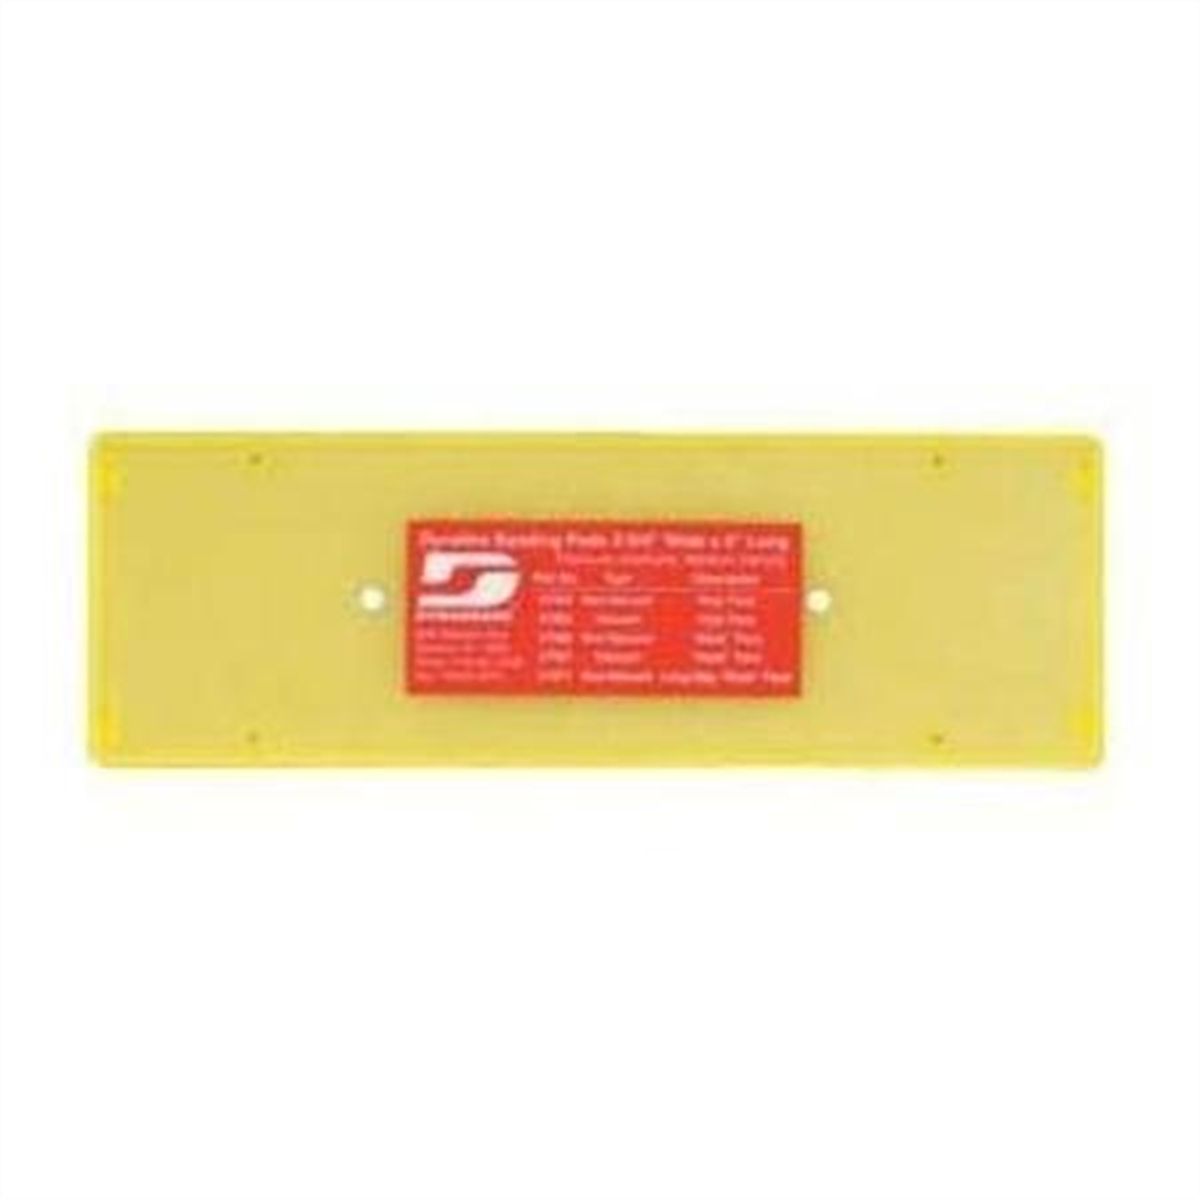 Dynaline PSA Sanding Pad 2-3/4 x 8 In for 10400